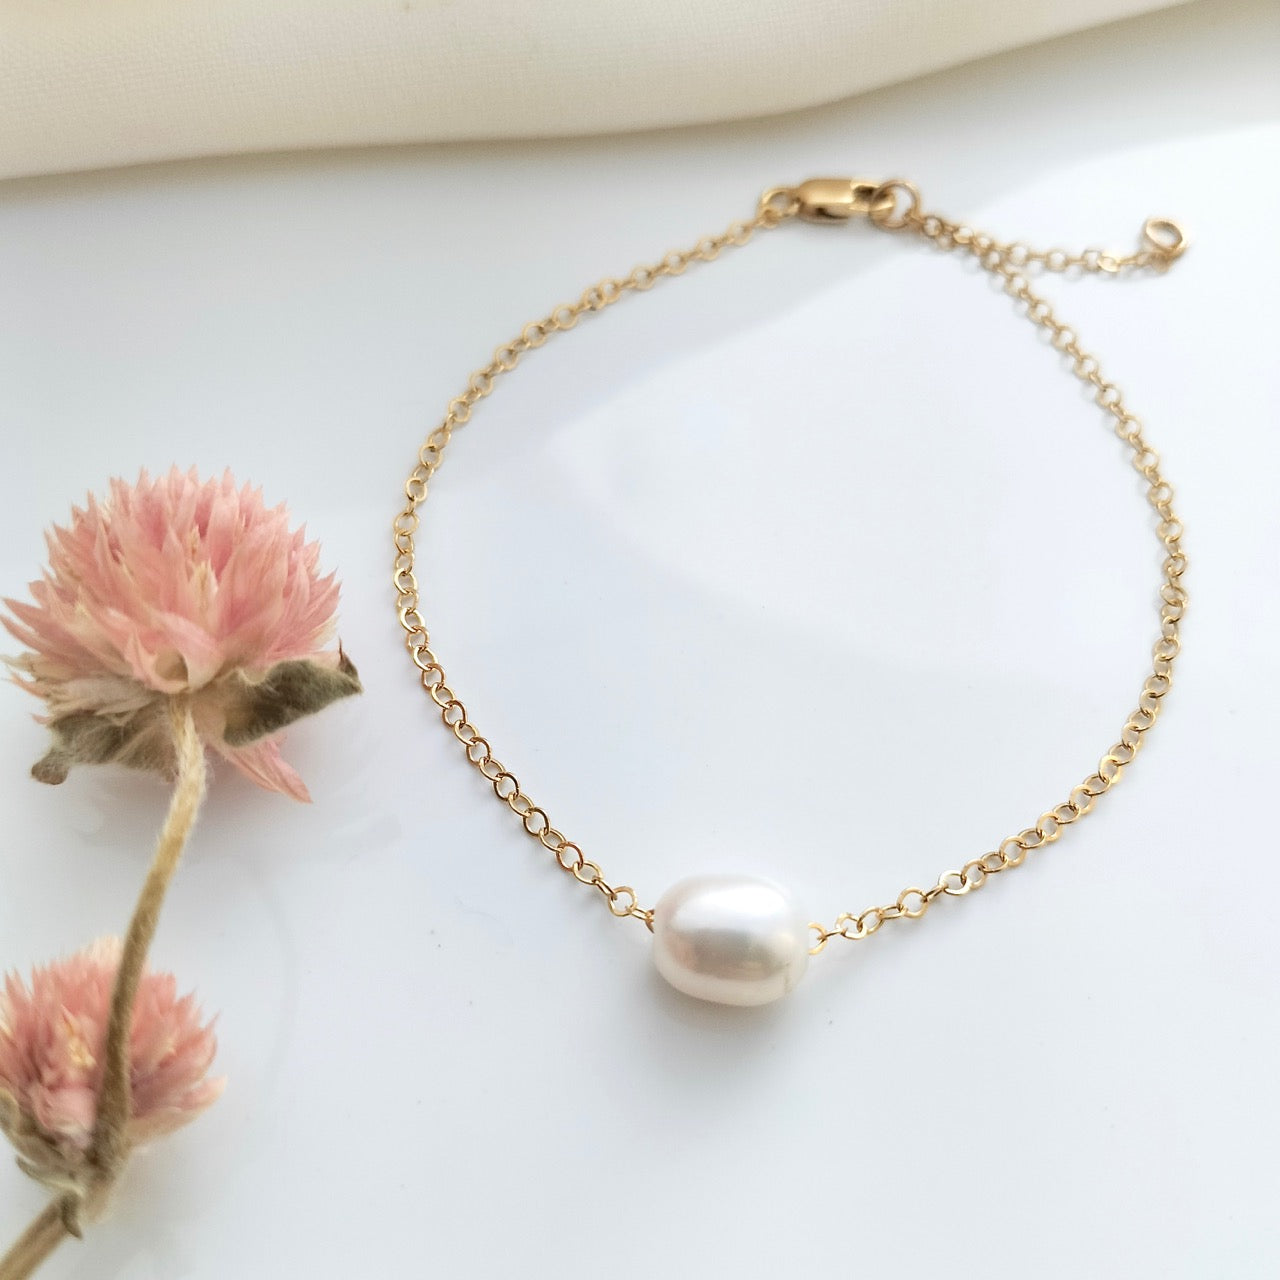 Gold chain bracelet with pearl